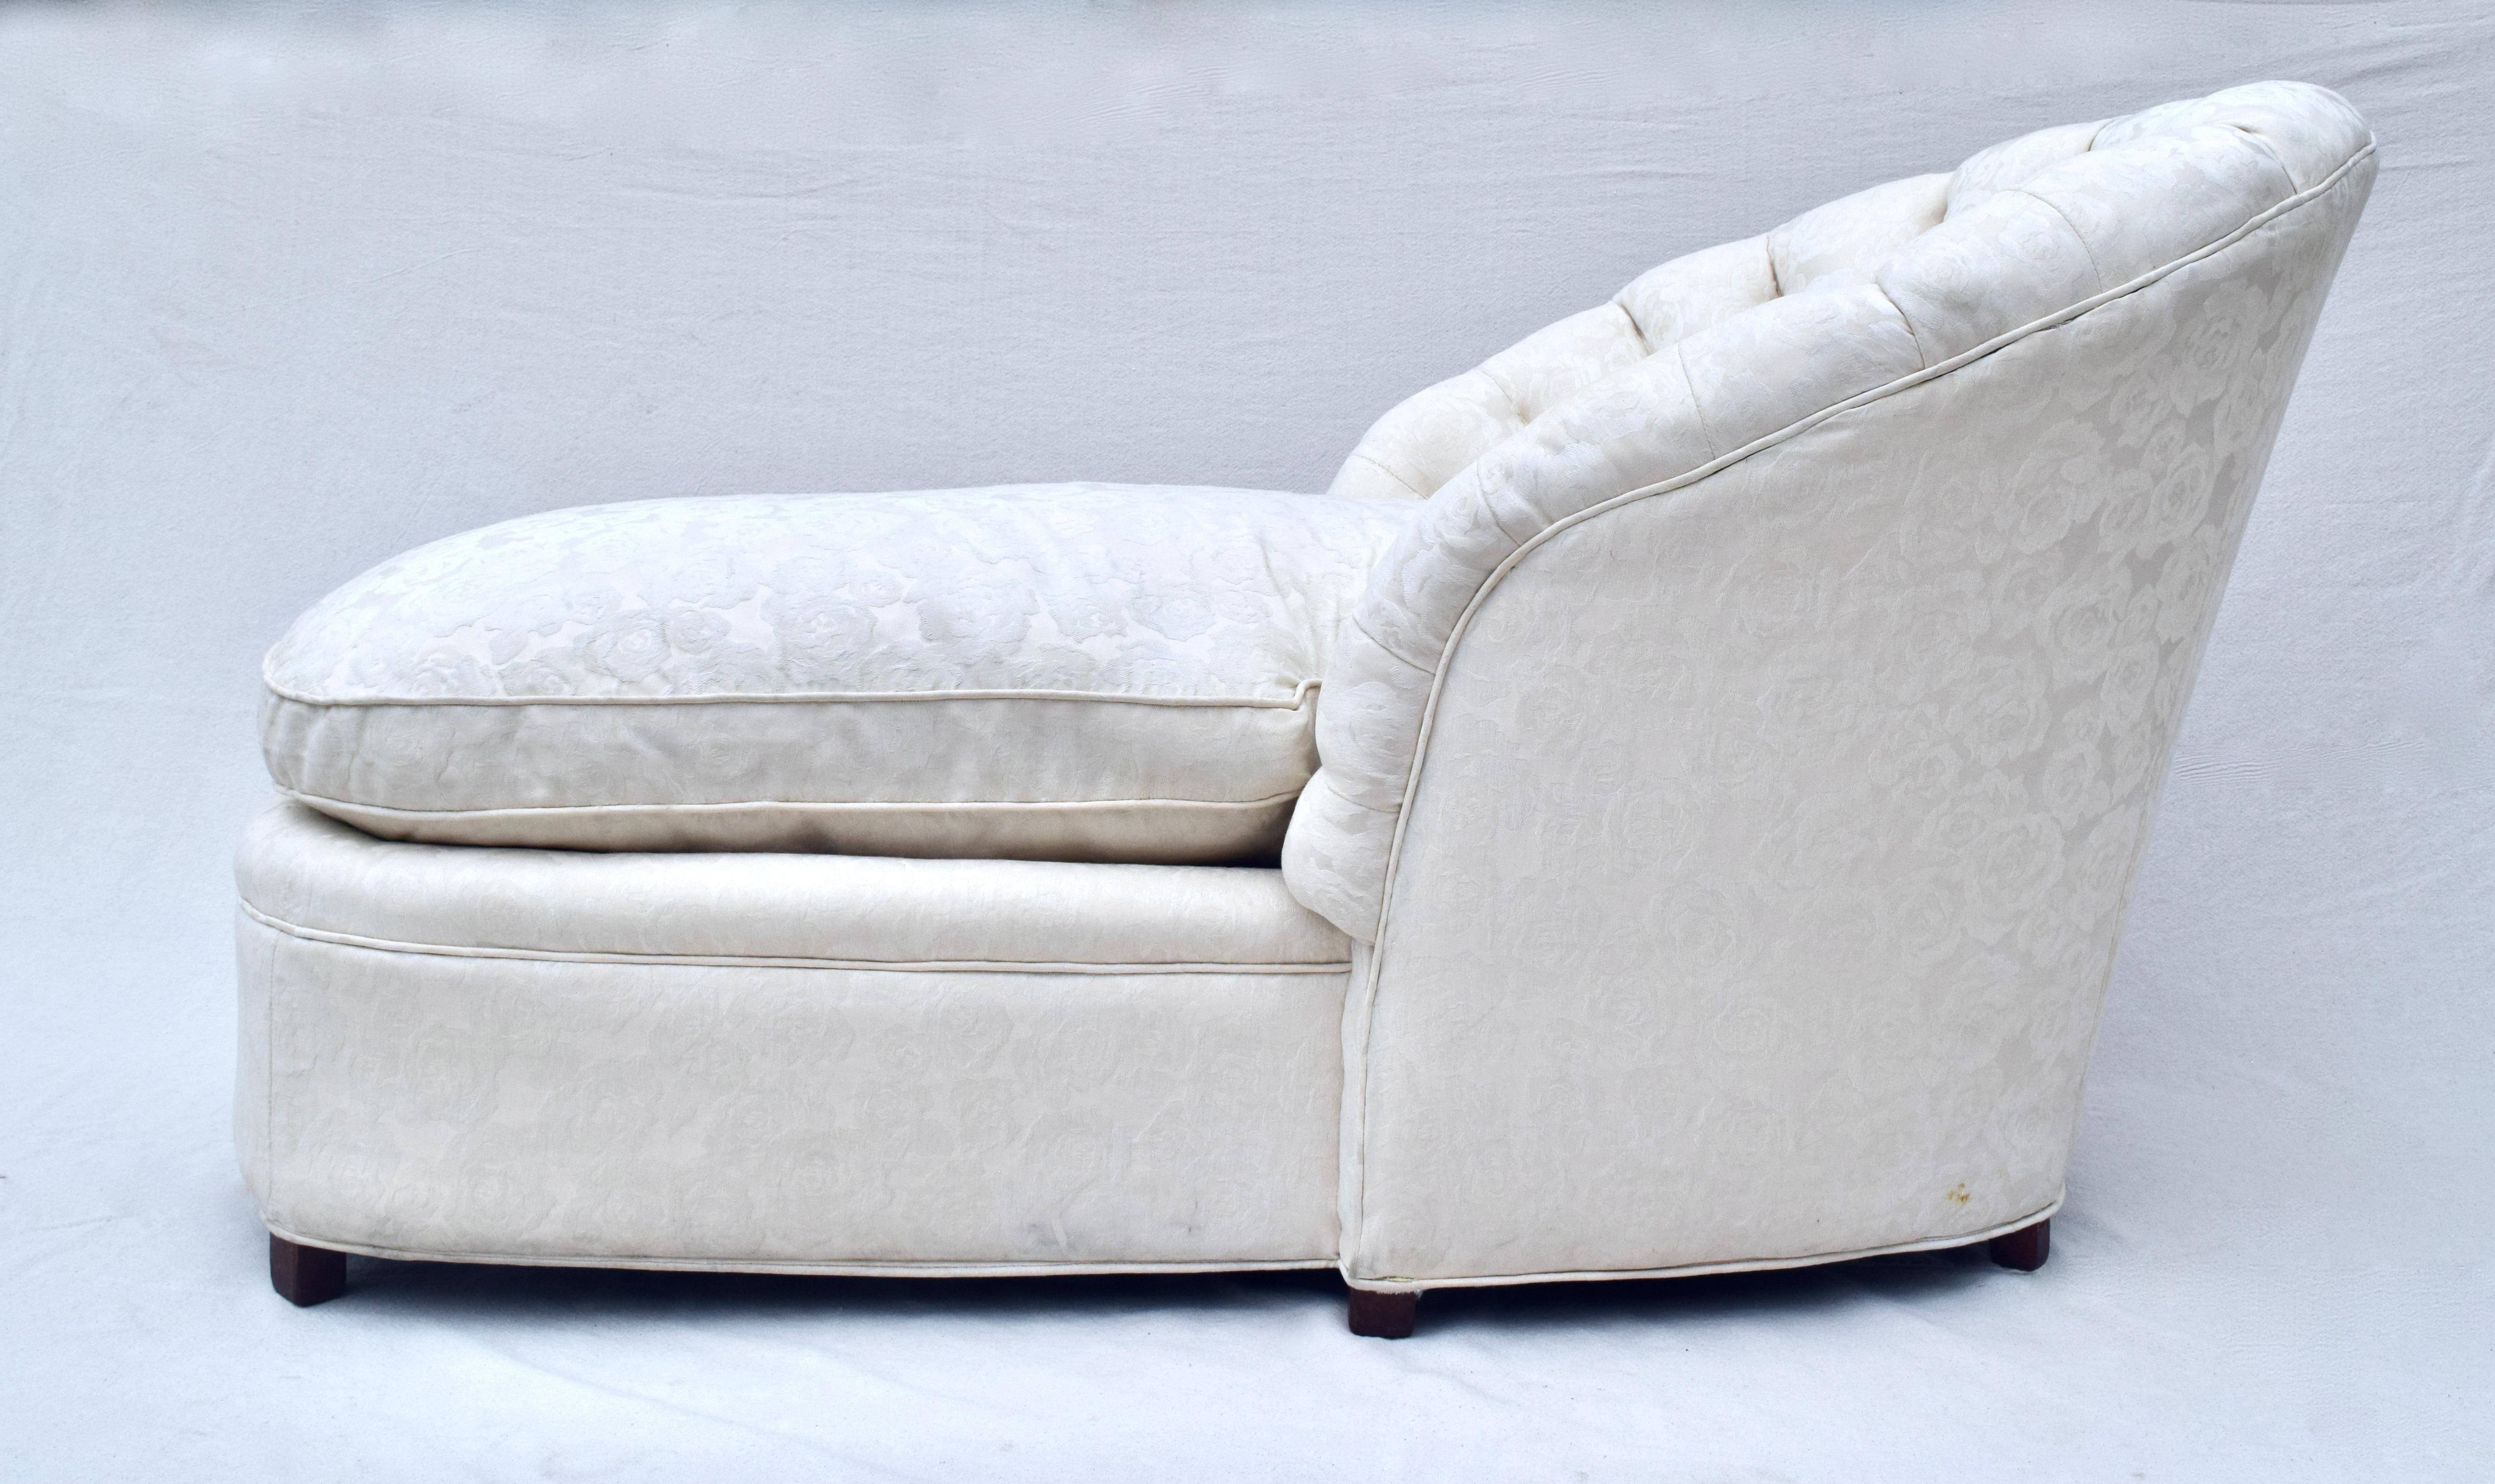 American Scalloped Channel Back Clamshell Form Chaise Lounge